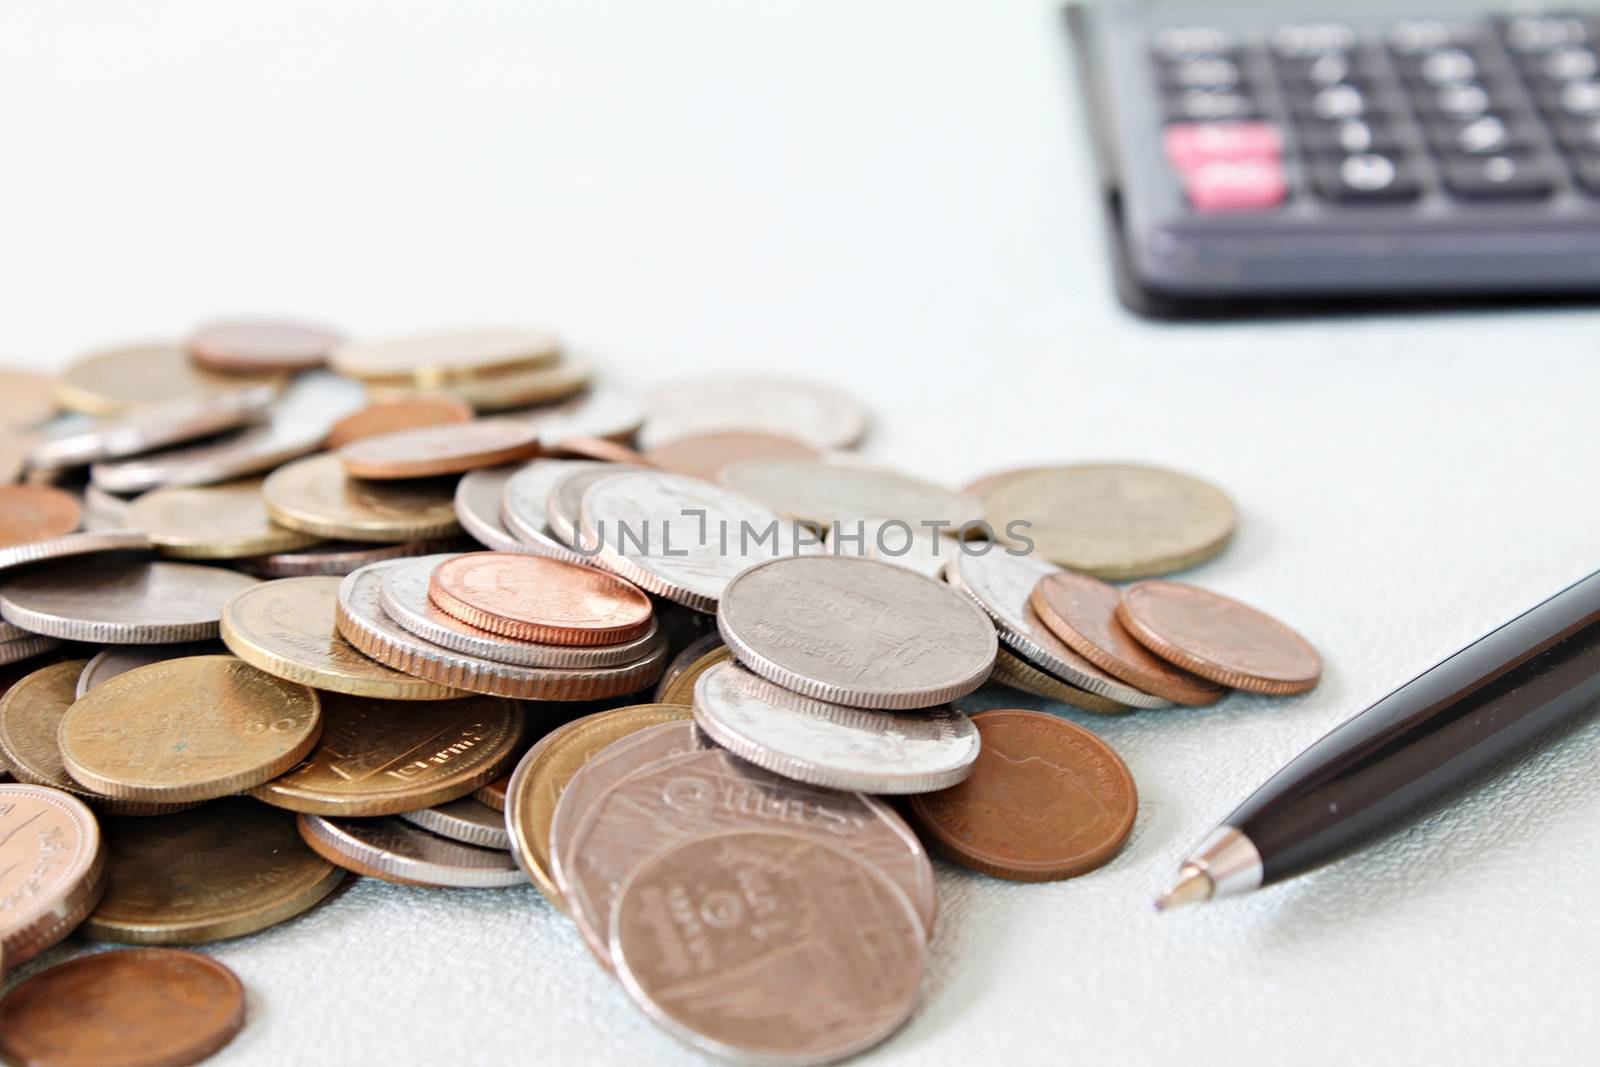 Business, finance, saving money, banking, loan, investment, taxes or accounting concept : Coins, pen and calculator on office desk table